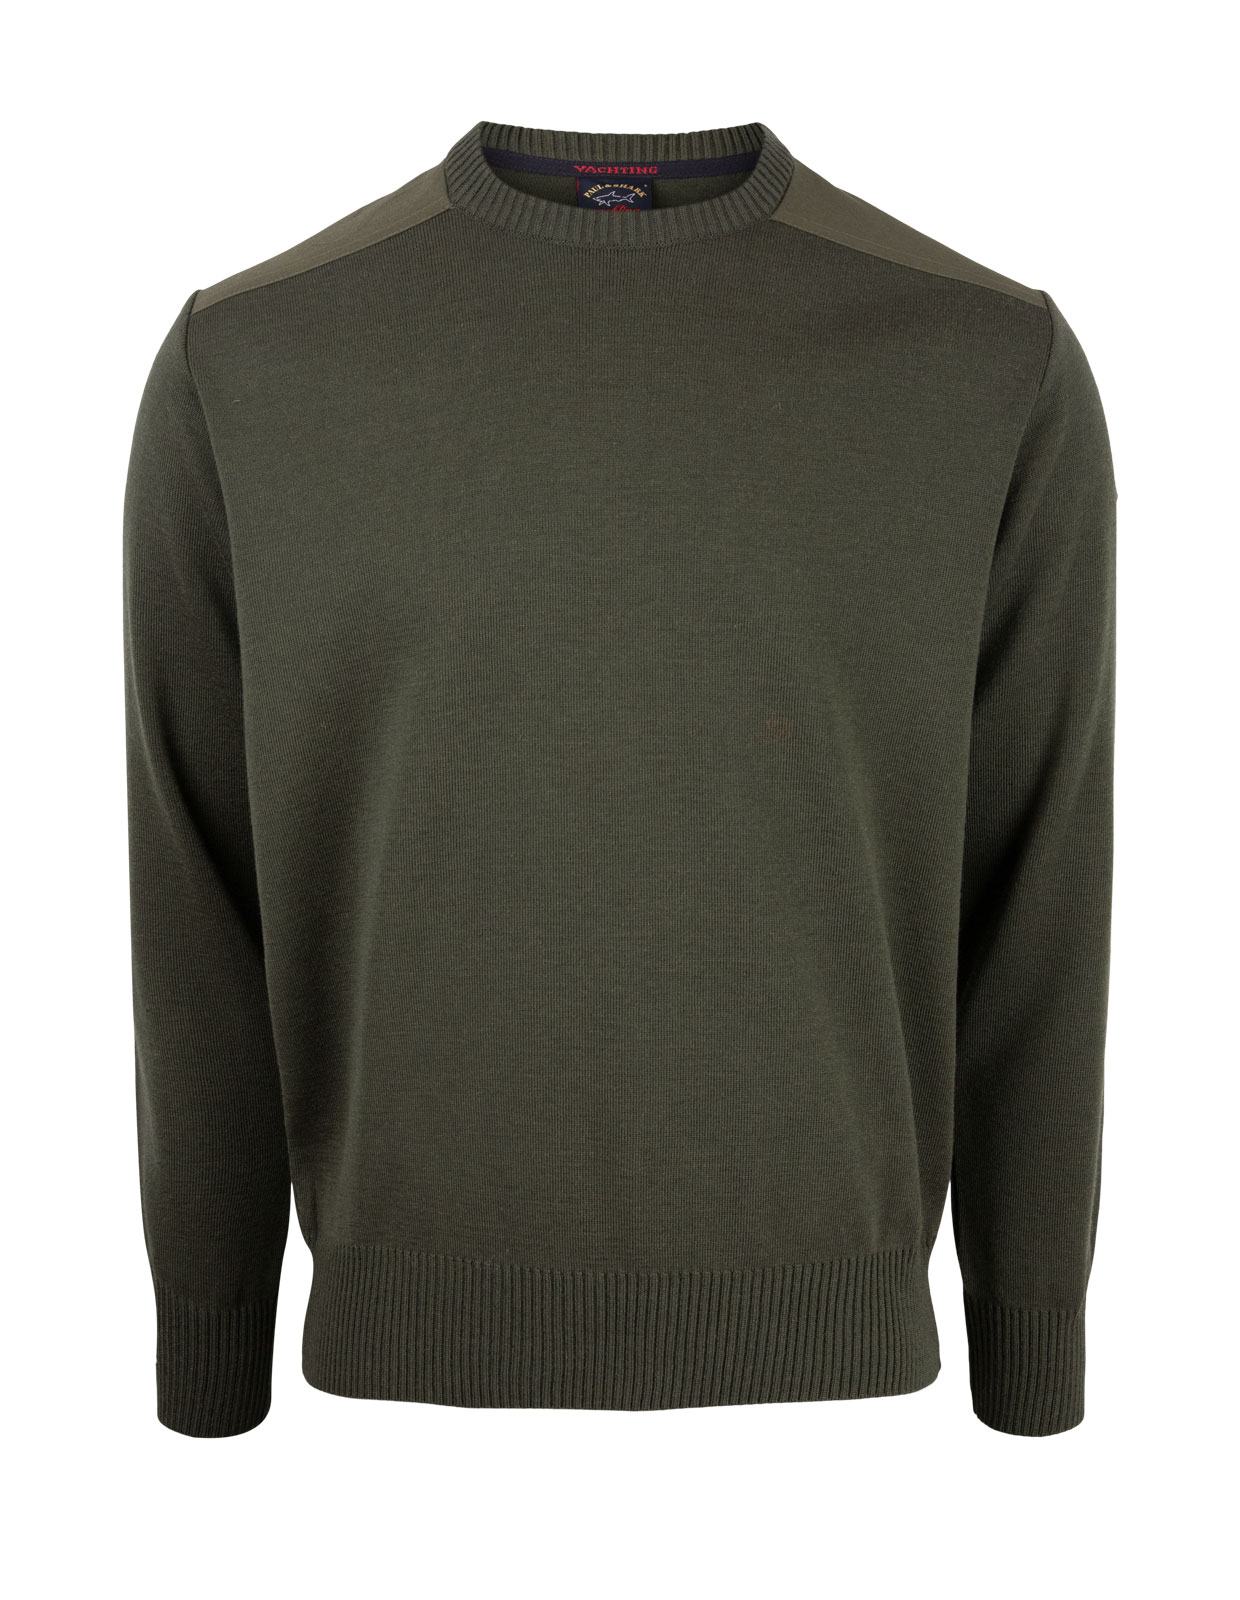 Yachting Wool Crewneck Sweater Olive